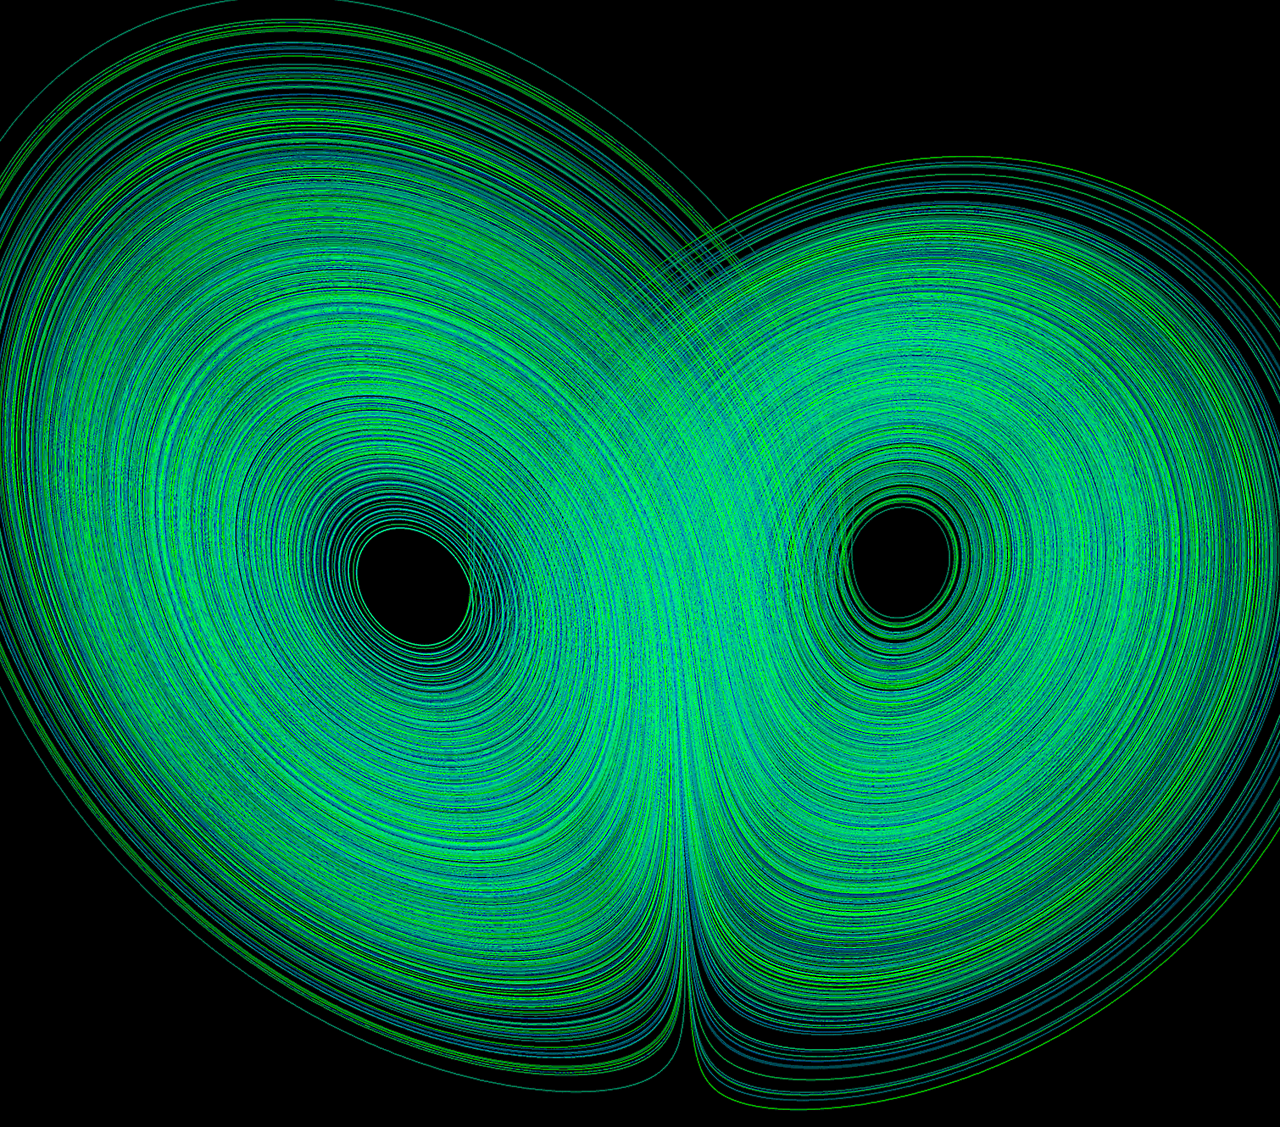 Magic Transistor — An example of a Lorenz attractor as described by a...